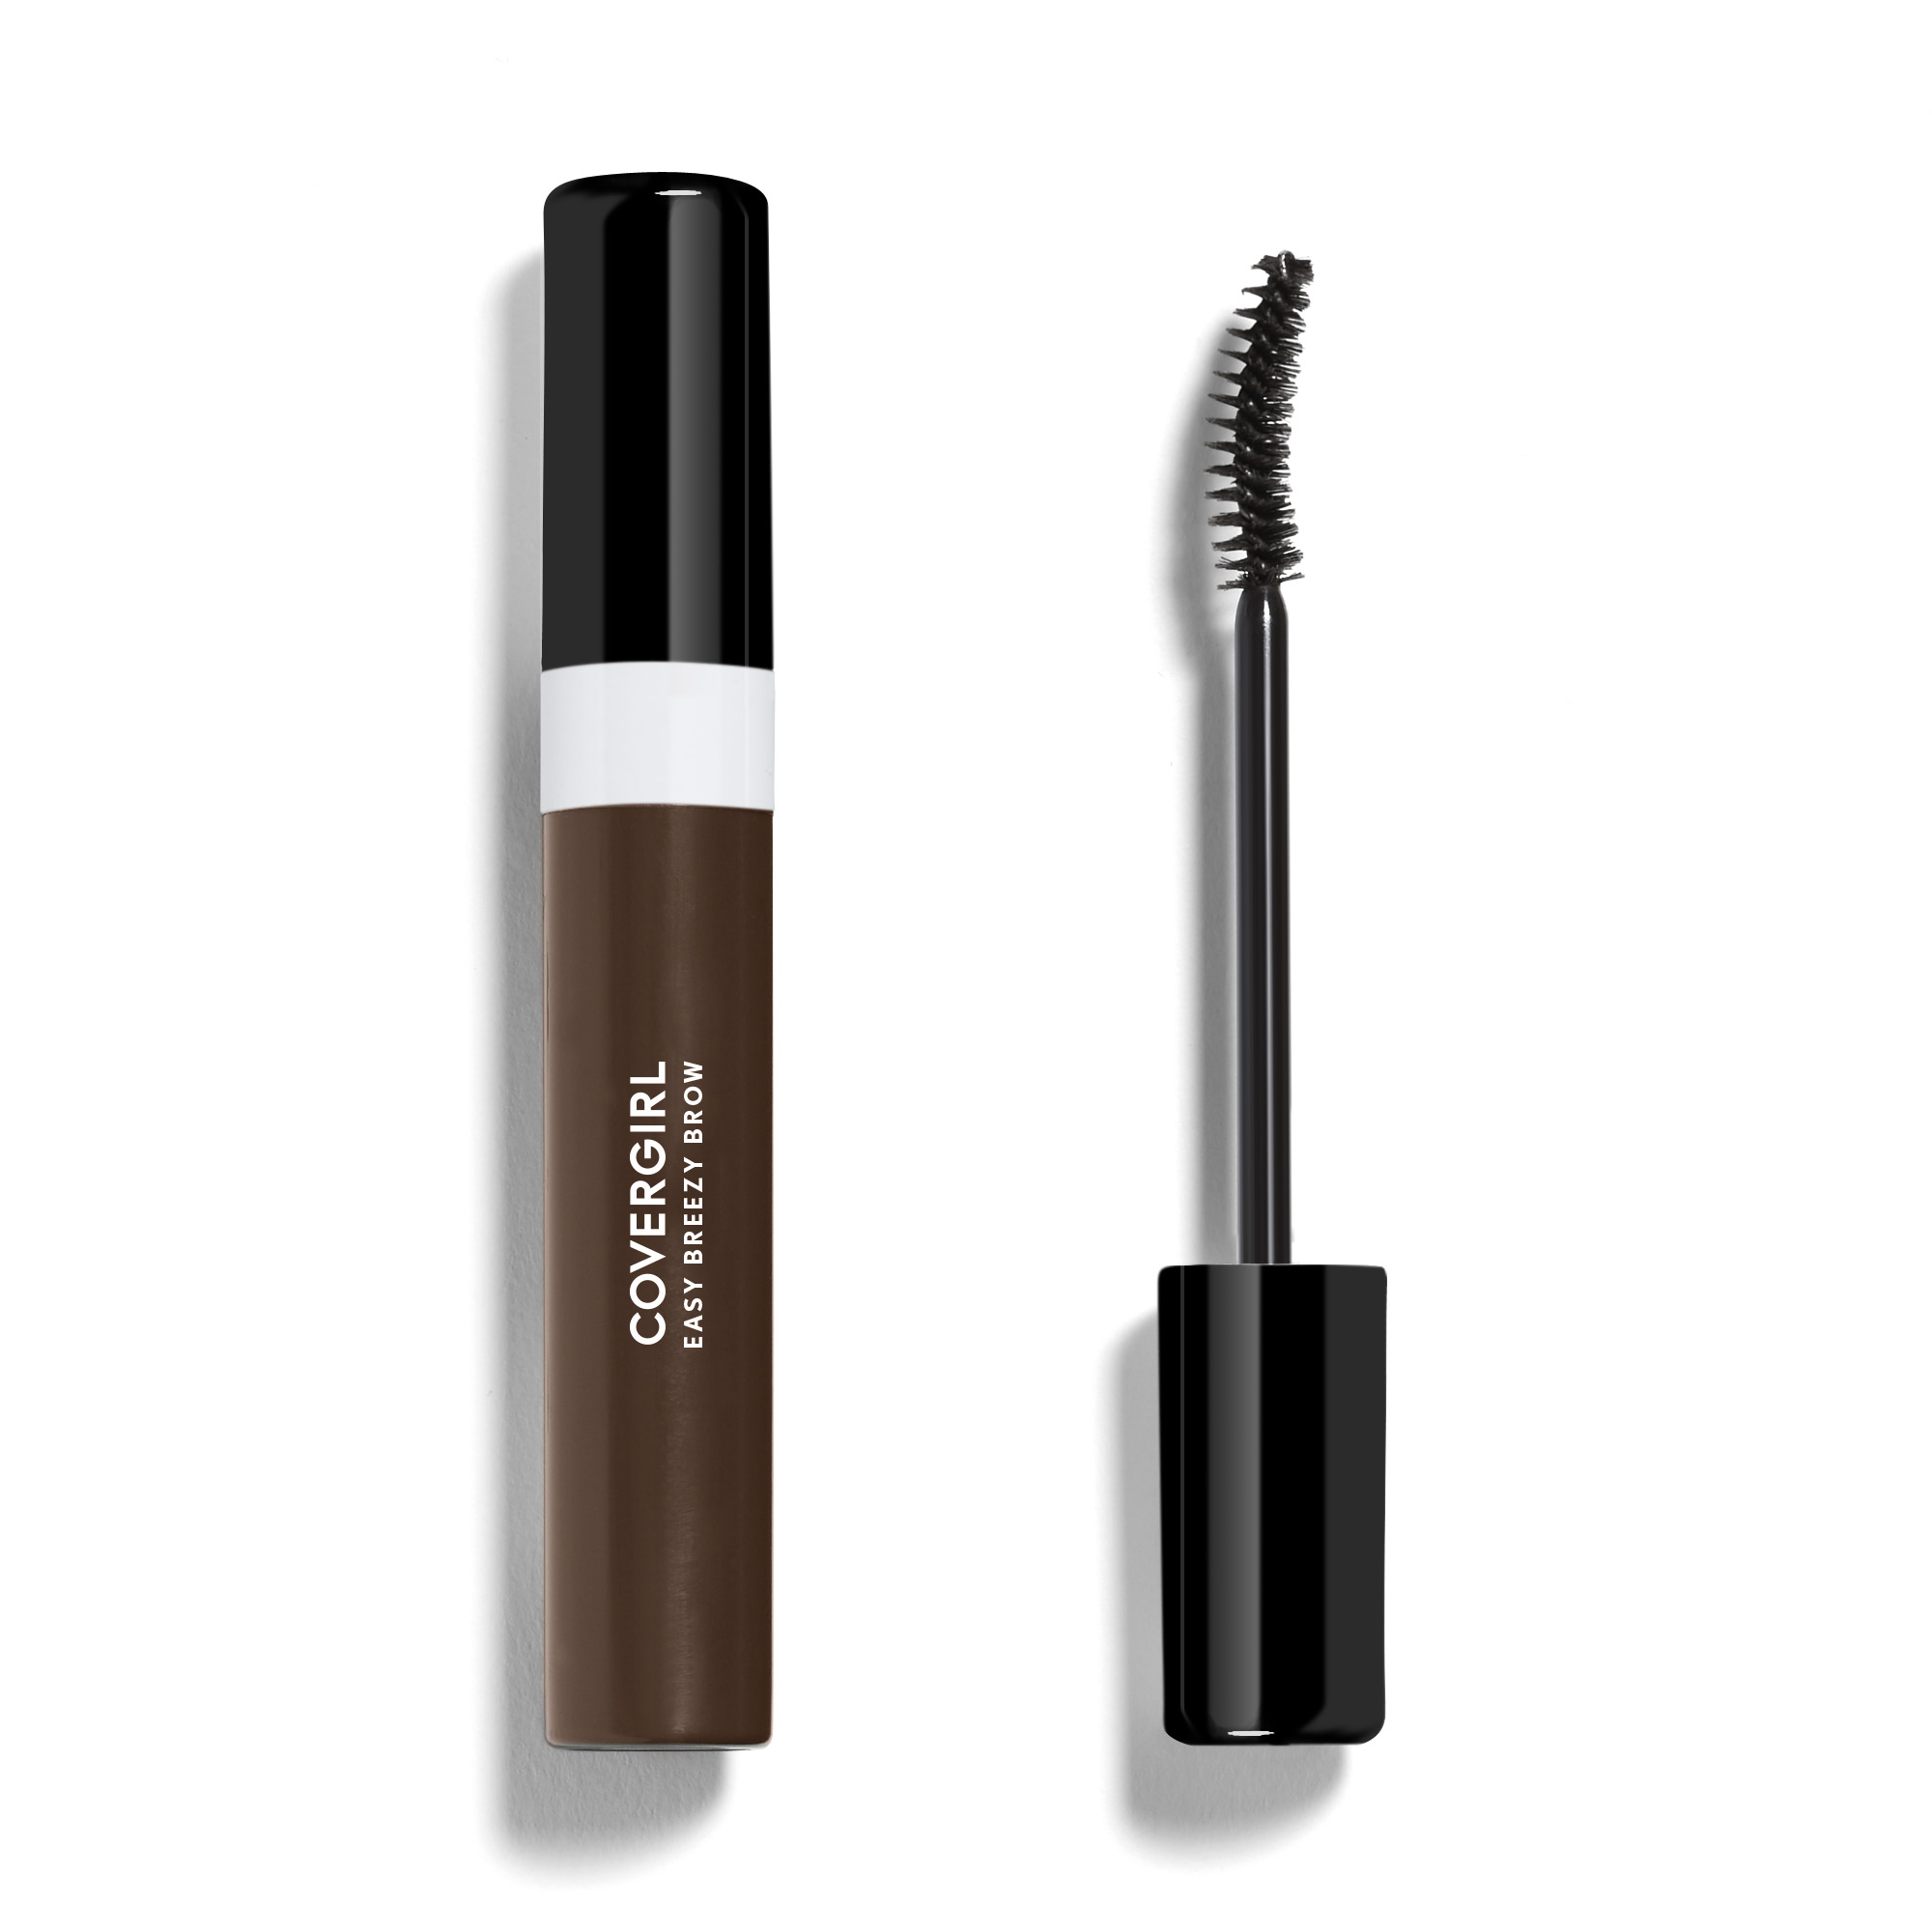 COVERGIRL Brow Shape & Define Eyebrow Mascara, 605 Rich Brown - image 3 of 3